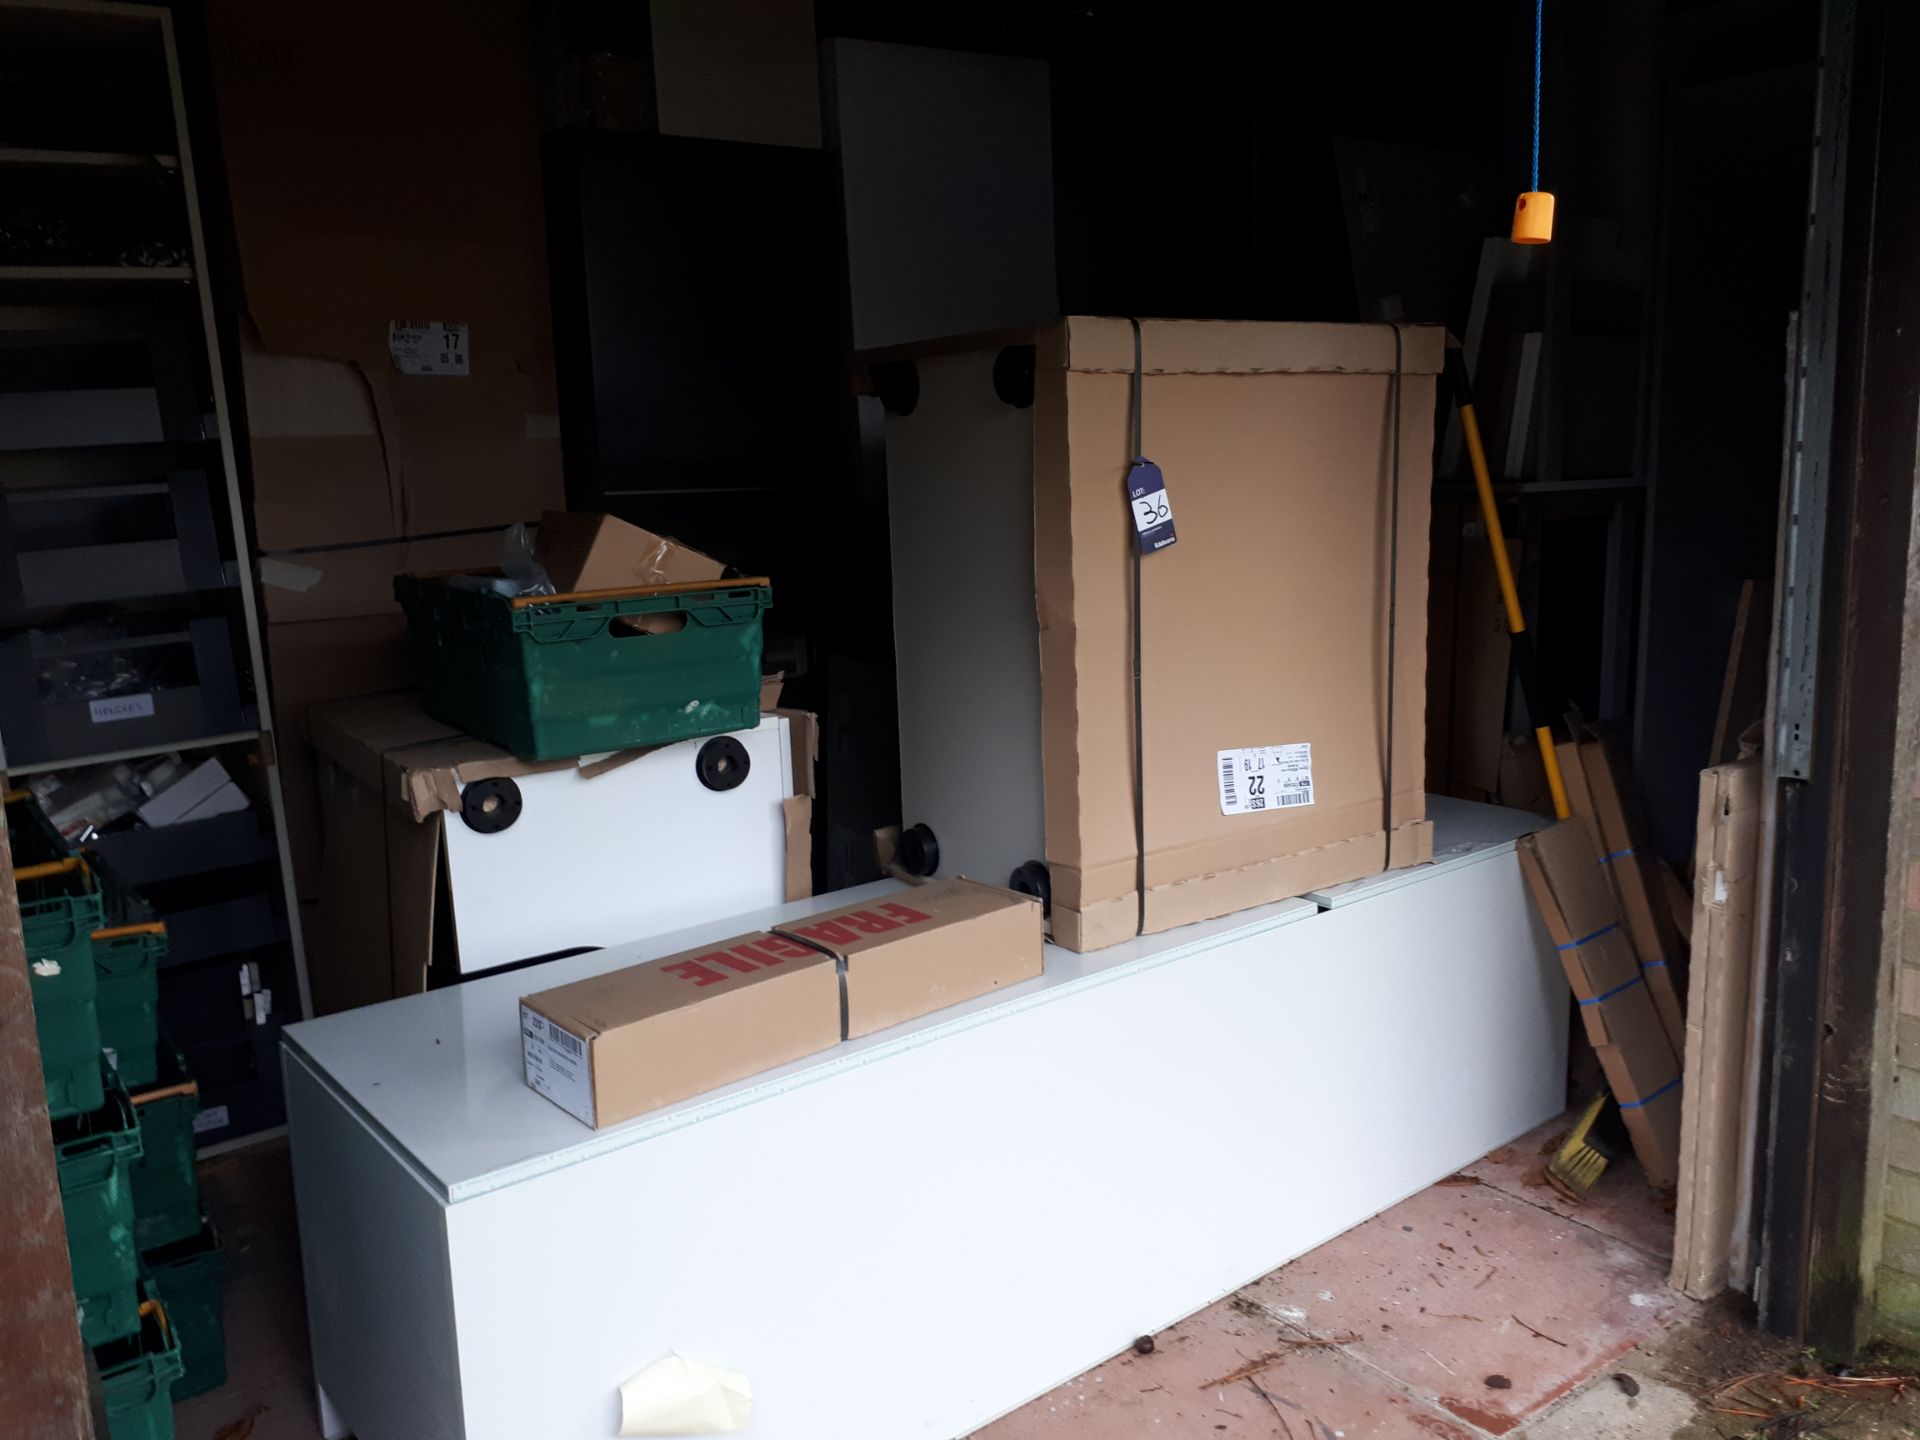 Contents of Store Room to include Work Surfaces, Cabinets, Door Furniture etc. - Image 2 of 7